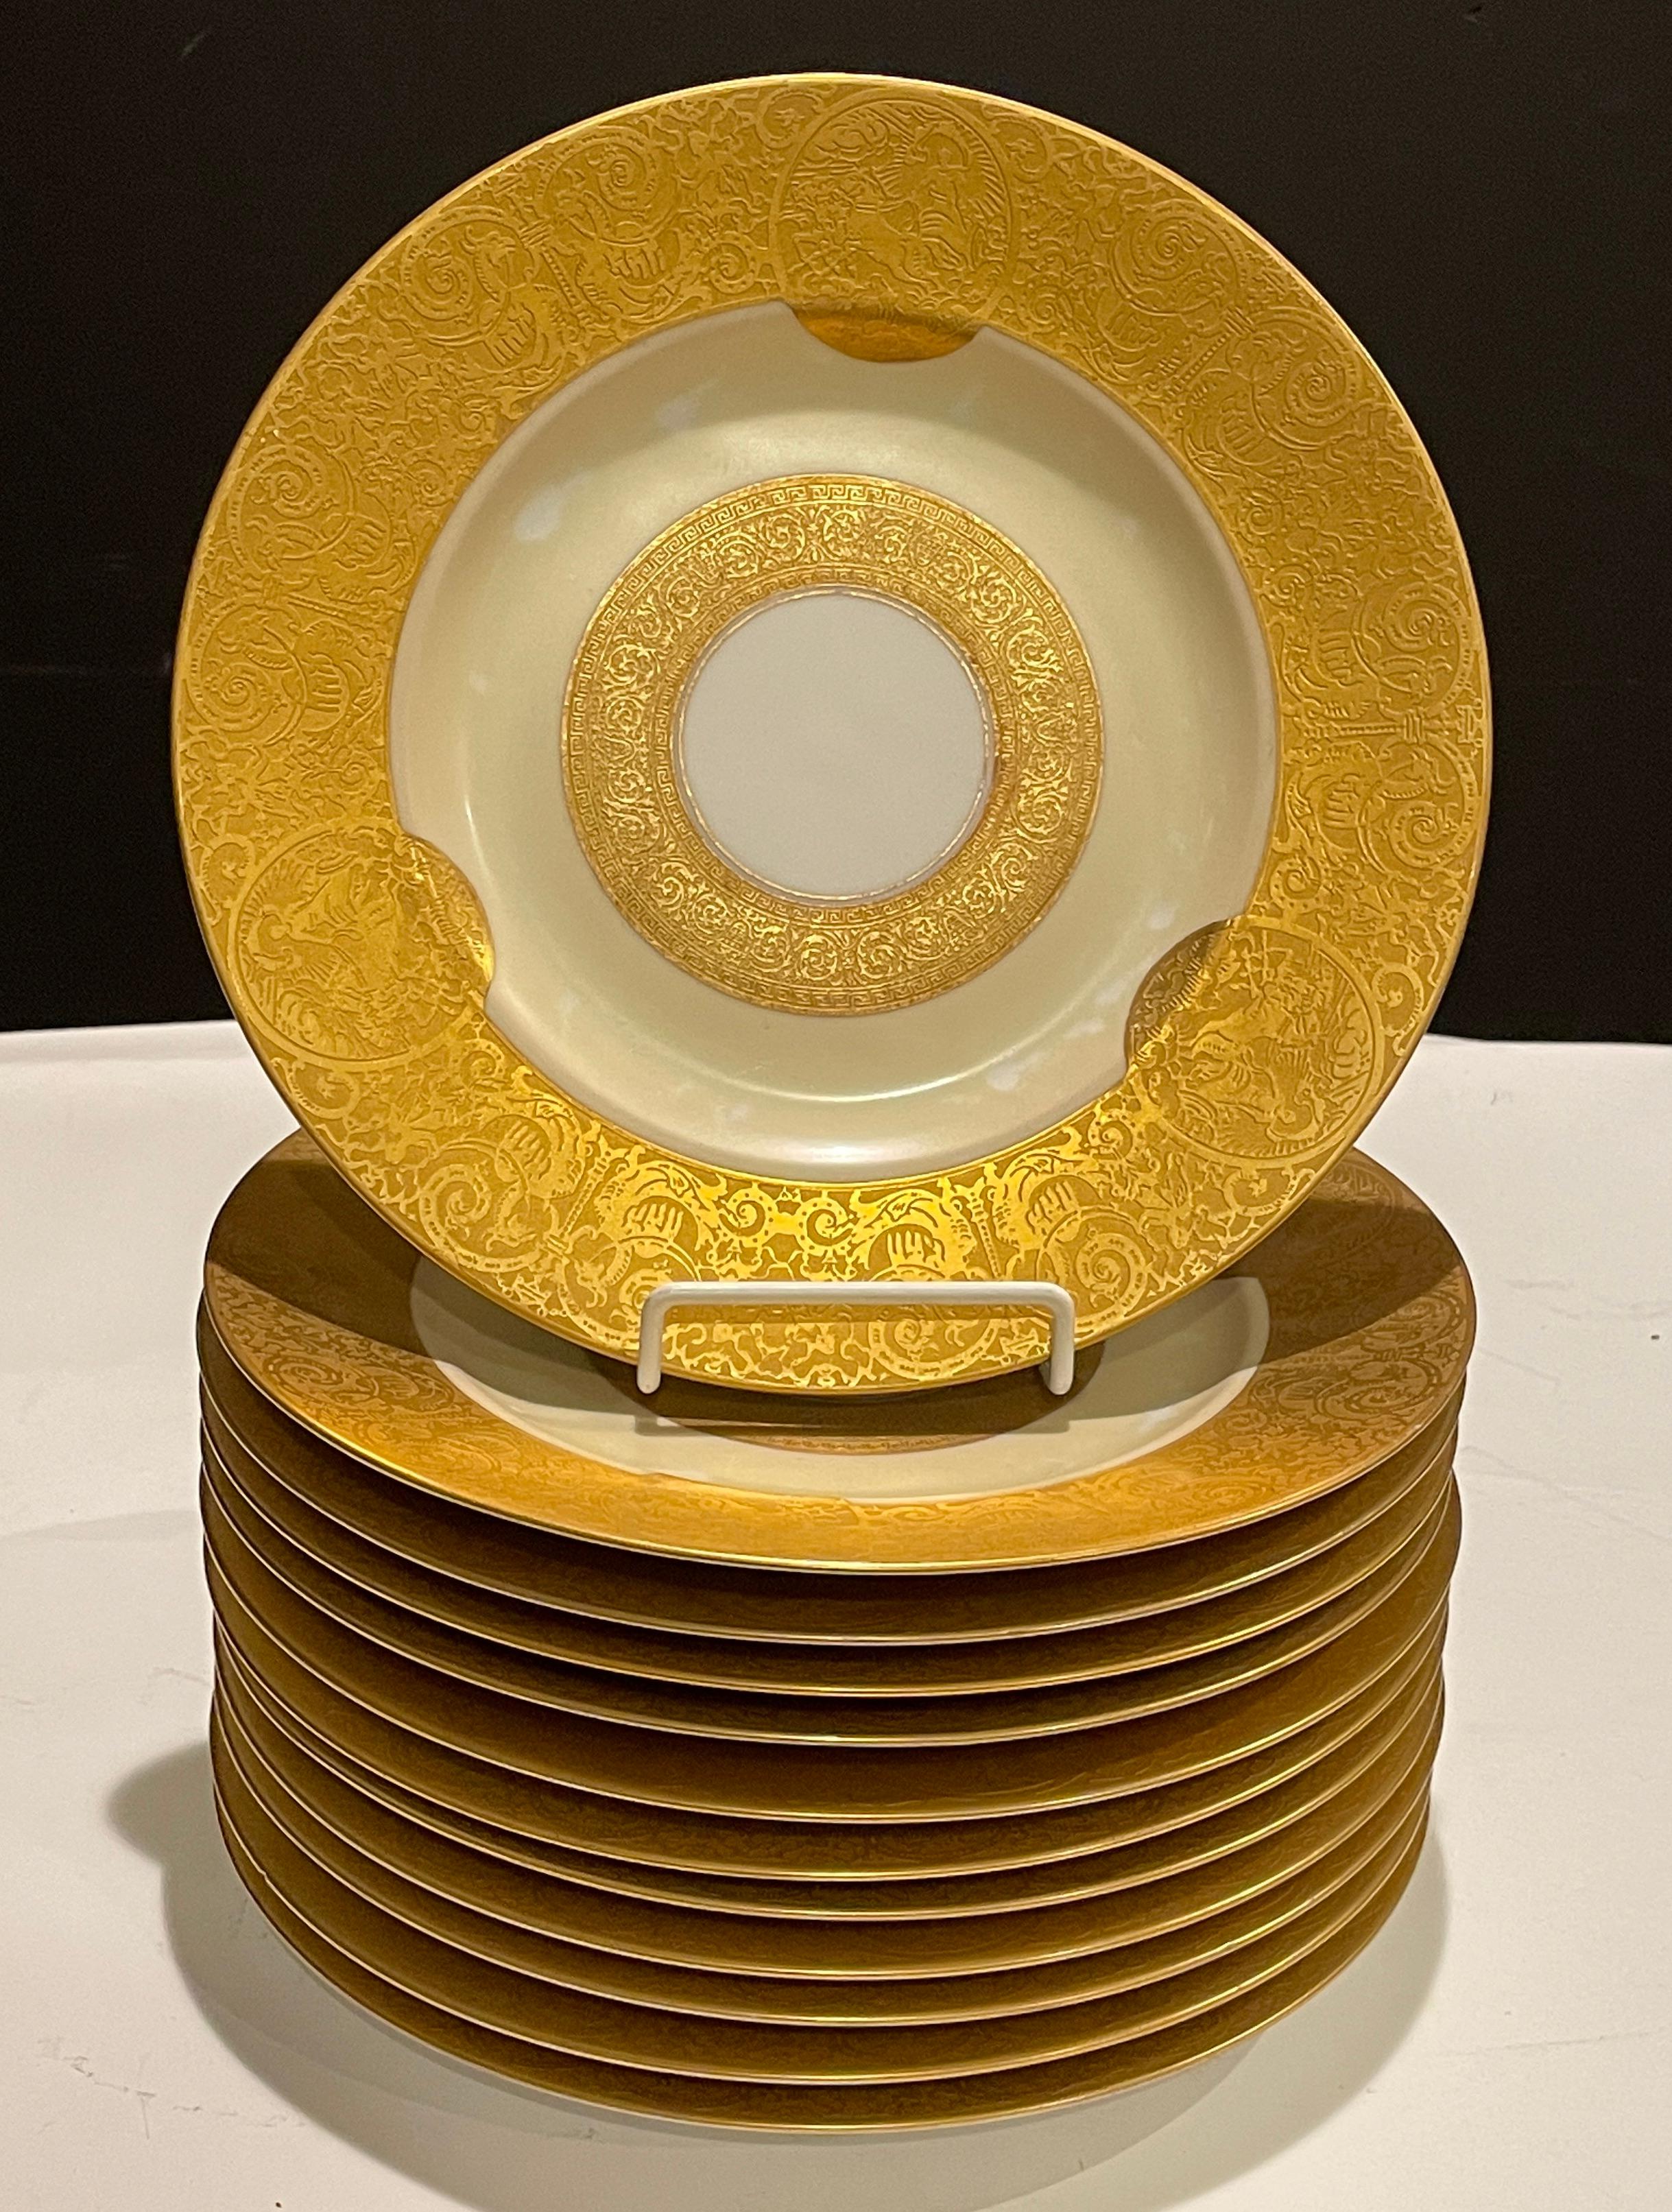 Set of 12 dinner plates with exceptional design featuring heavy raised gilding with images of chariots and mythological Griffin's or Gryphon. Marked Royal Bavarian Hutschenreuther Selb Bavaria.